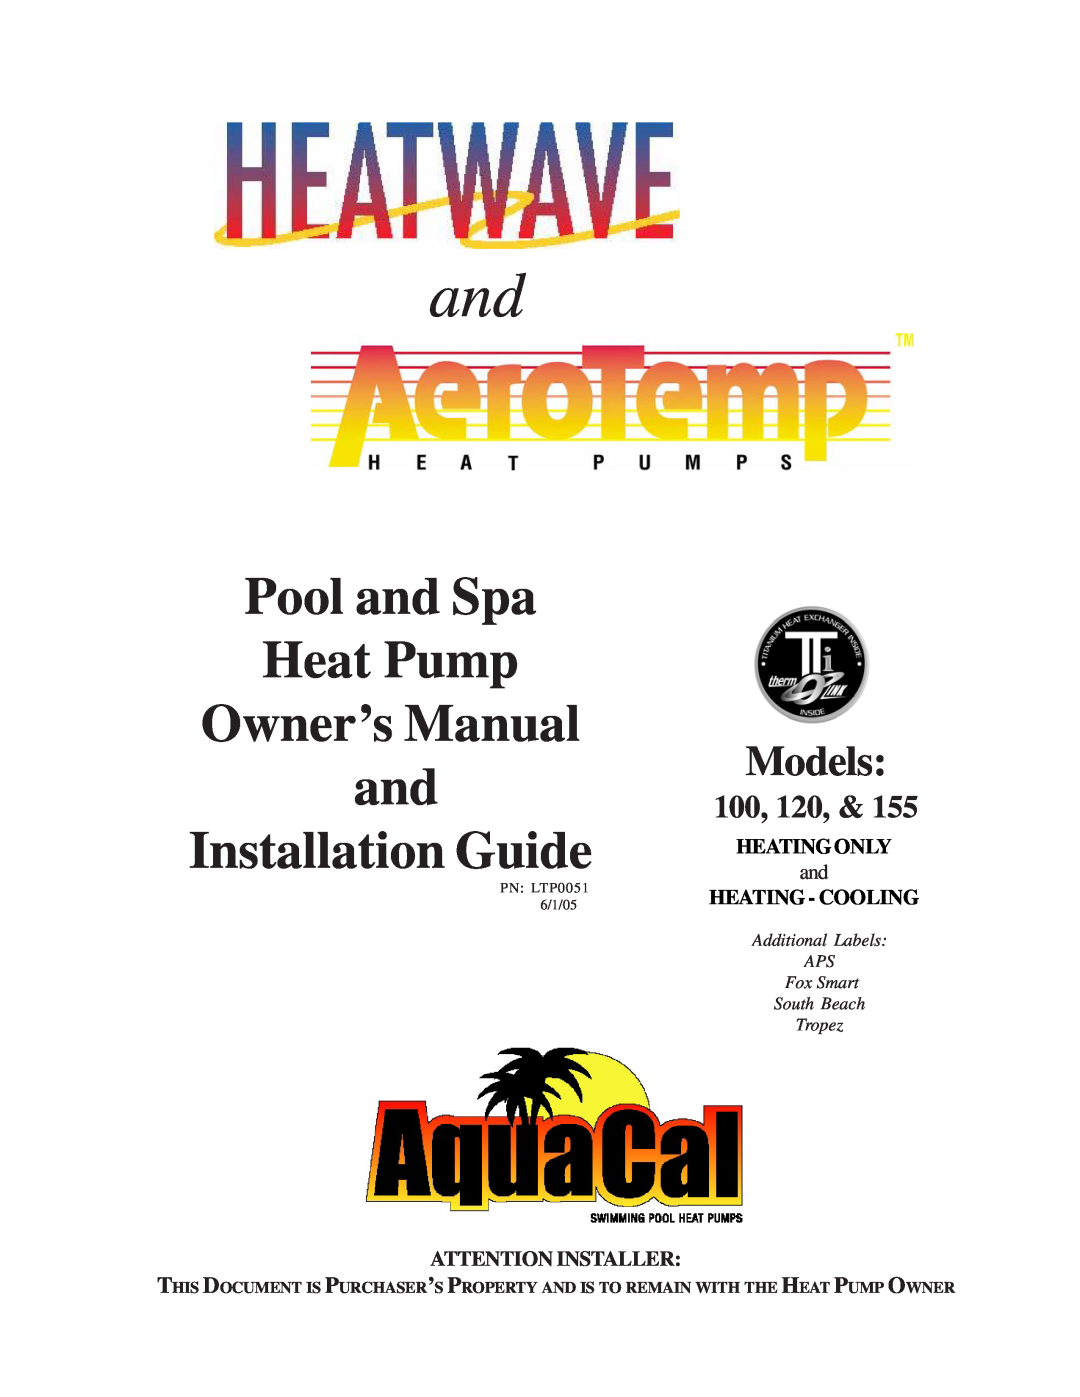 Aquacal 100 owner manual Models, Installation Guide, Heating Only, Heating - Cooling, Attention Installer, Tropez 